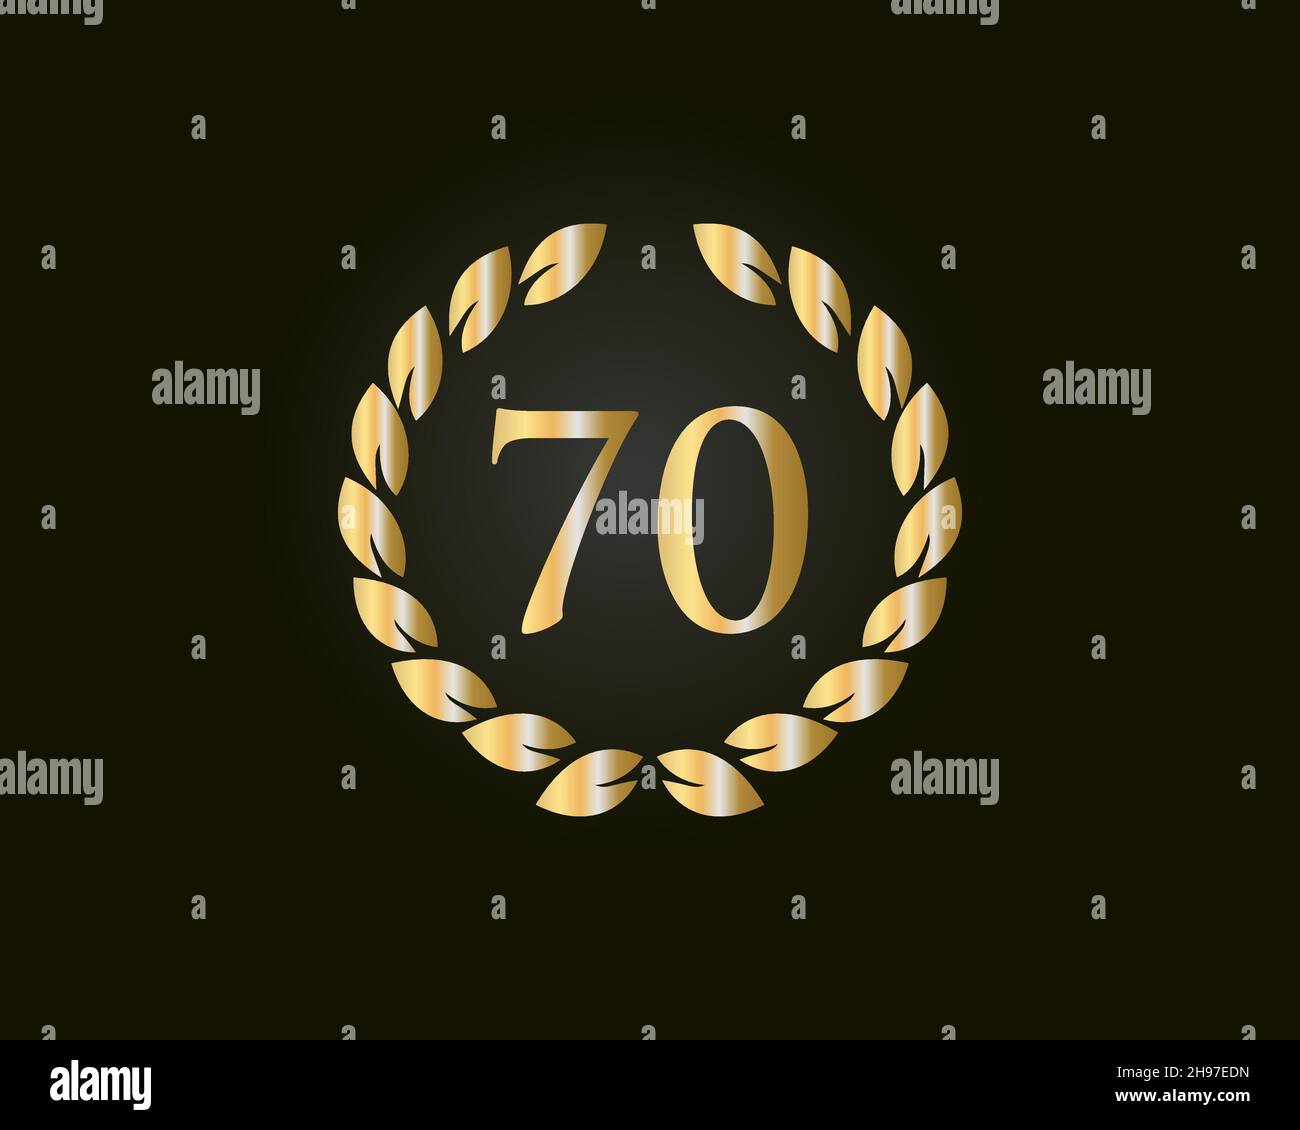 70th Anniversary Ring Logo Template. 70th Years Anniversary Logo With Golden Ring Isolated On Black Background, For Birthday, Anniversary And Company Stock Vector